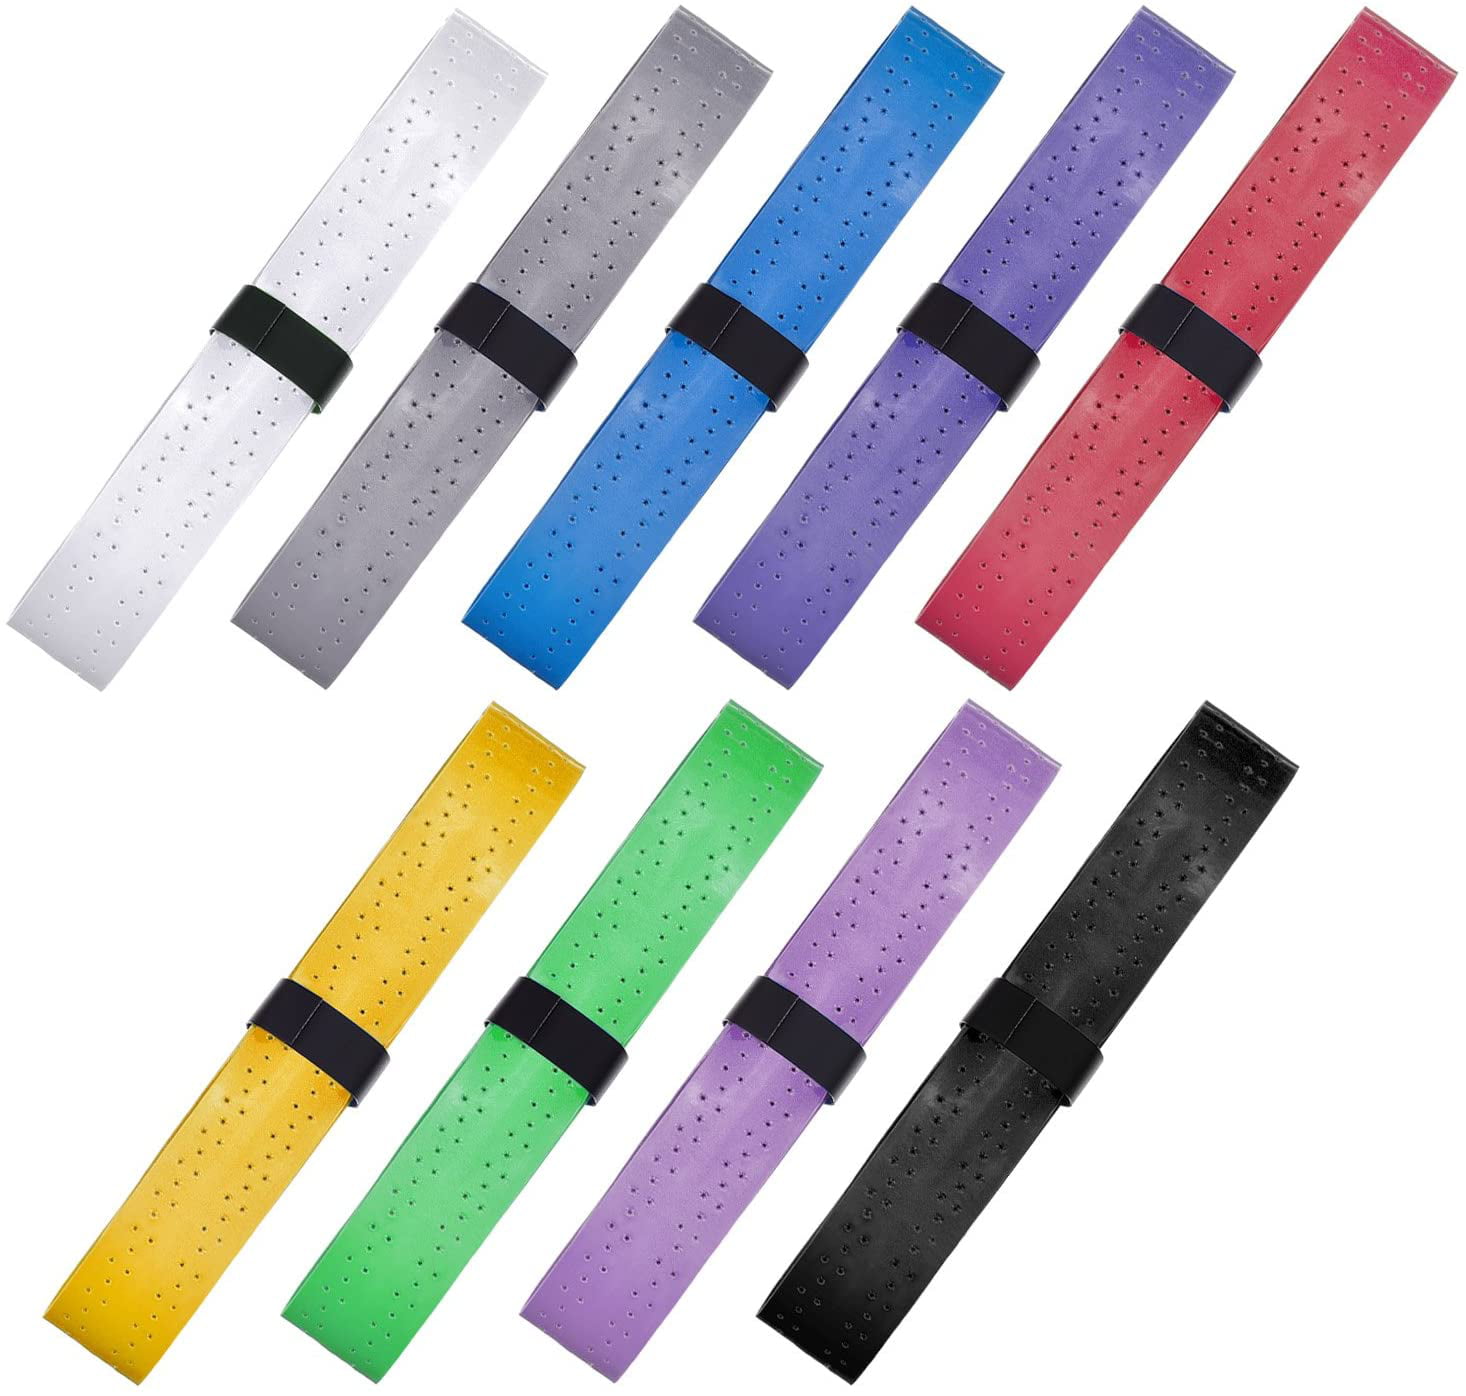 Multicolor & Tennis Badminton Racket Overgrips For Anti-Slip And Absorbent Grip 